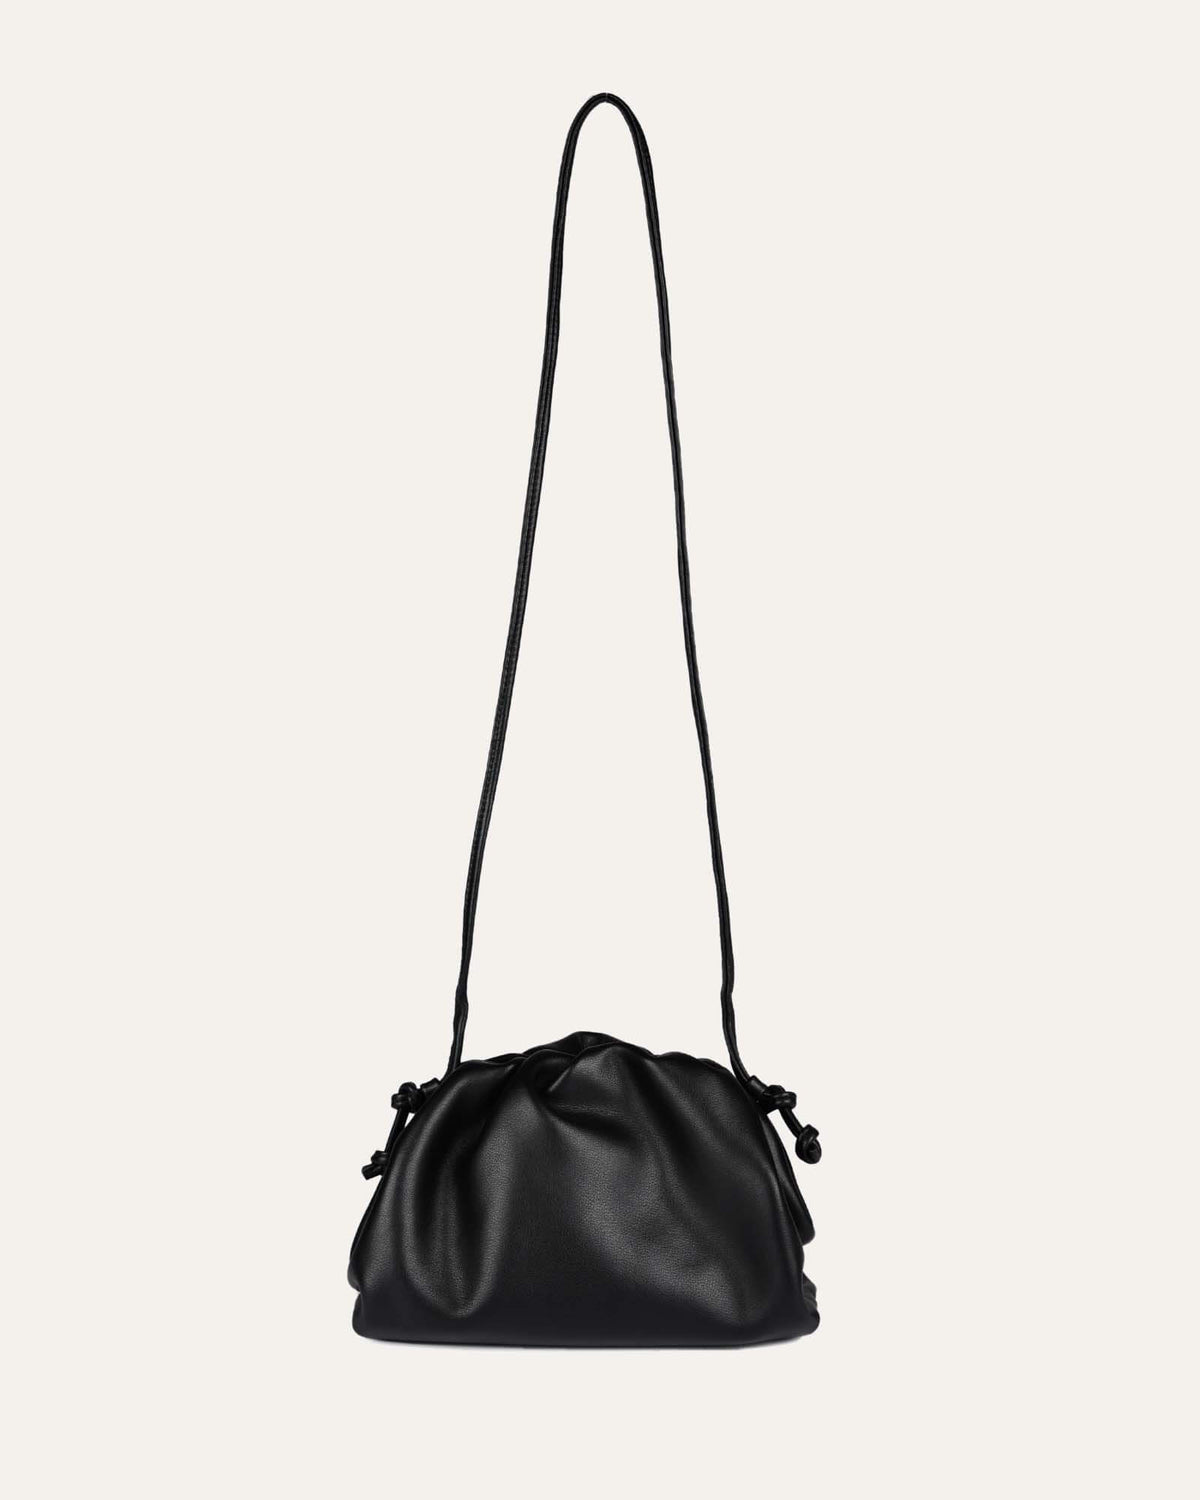 BAMBIE CROSS BODY BAG BLACK LEATHER